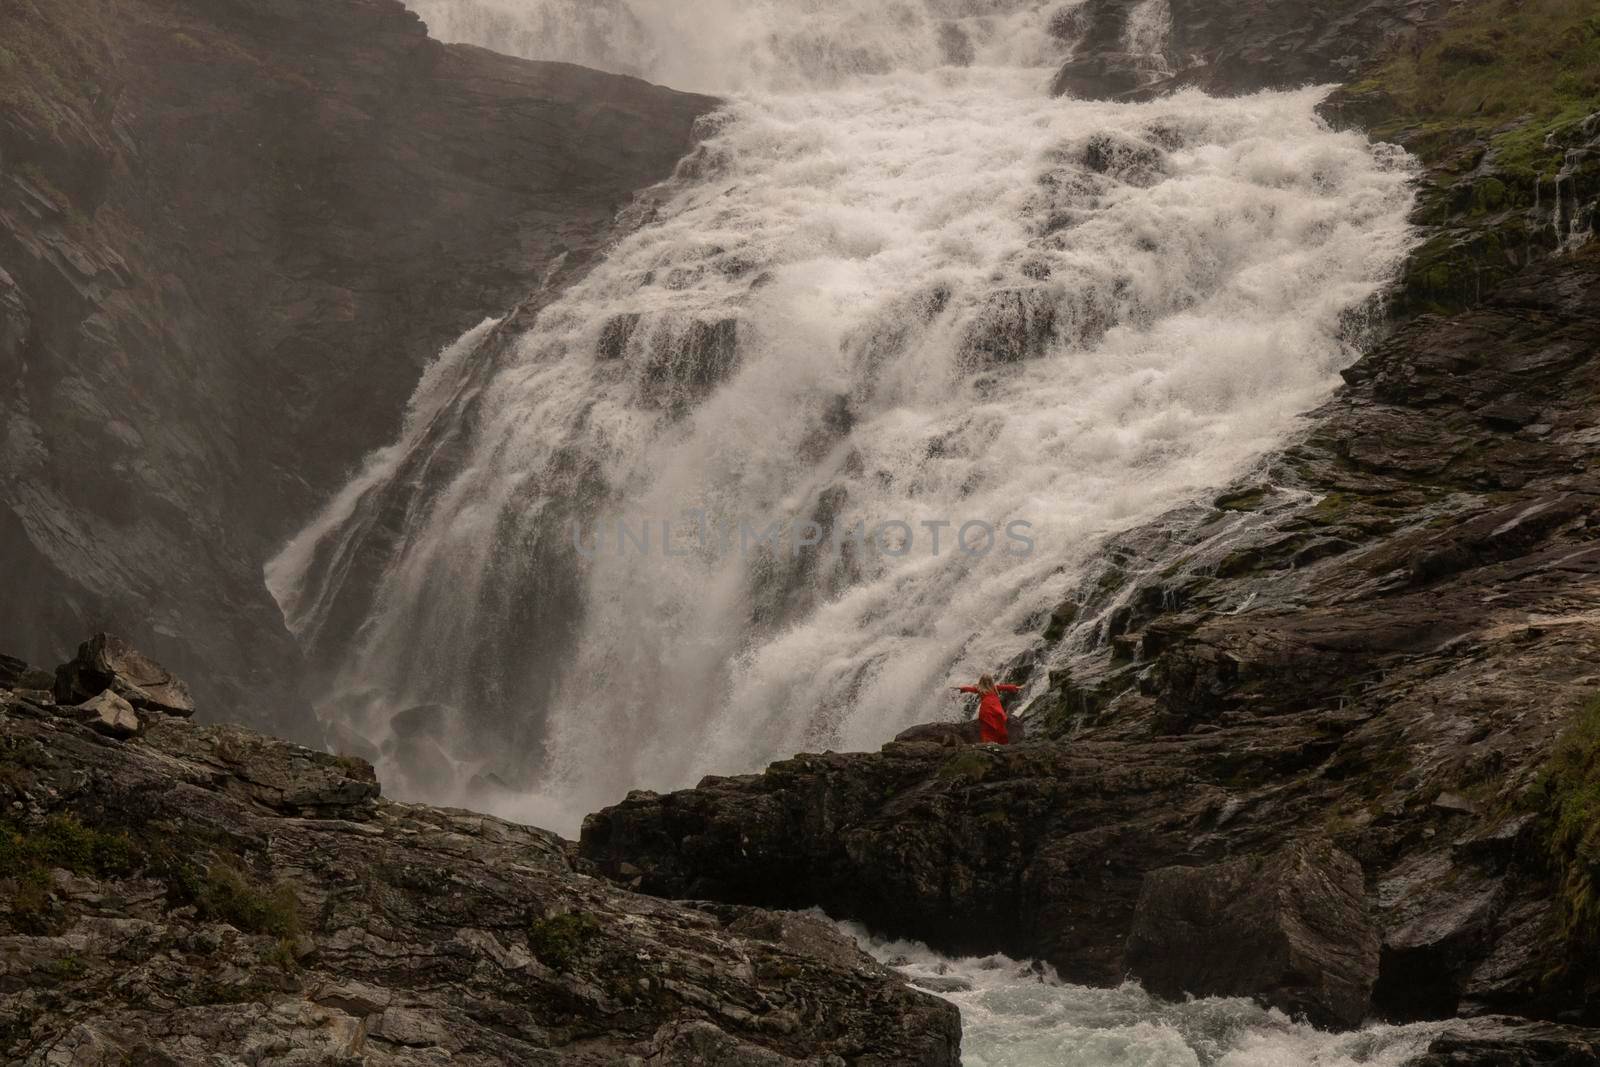 Dancing with the water in Kjosfossen waterfall by ValentimePix